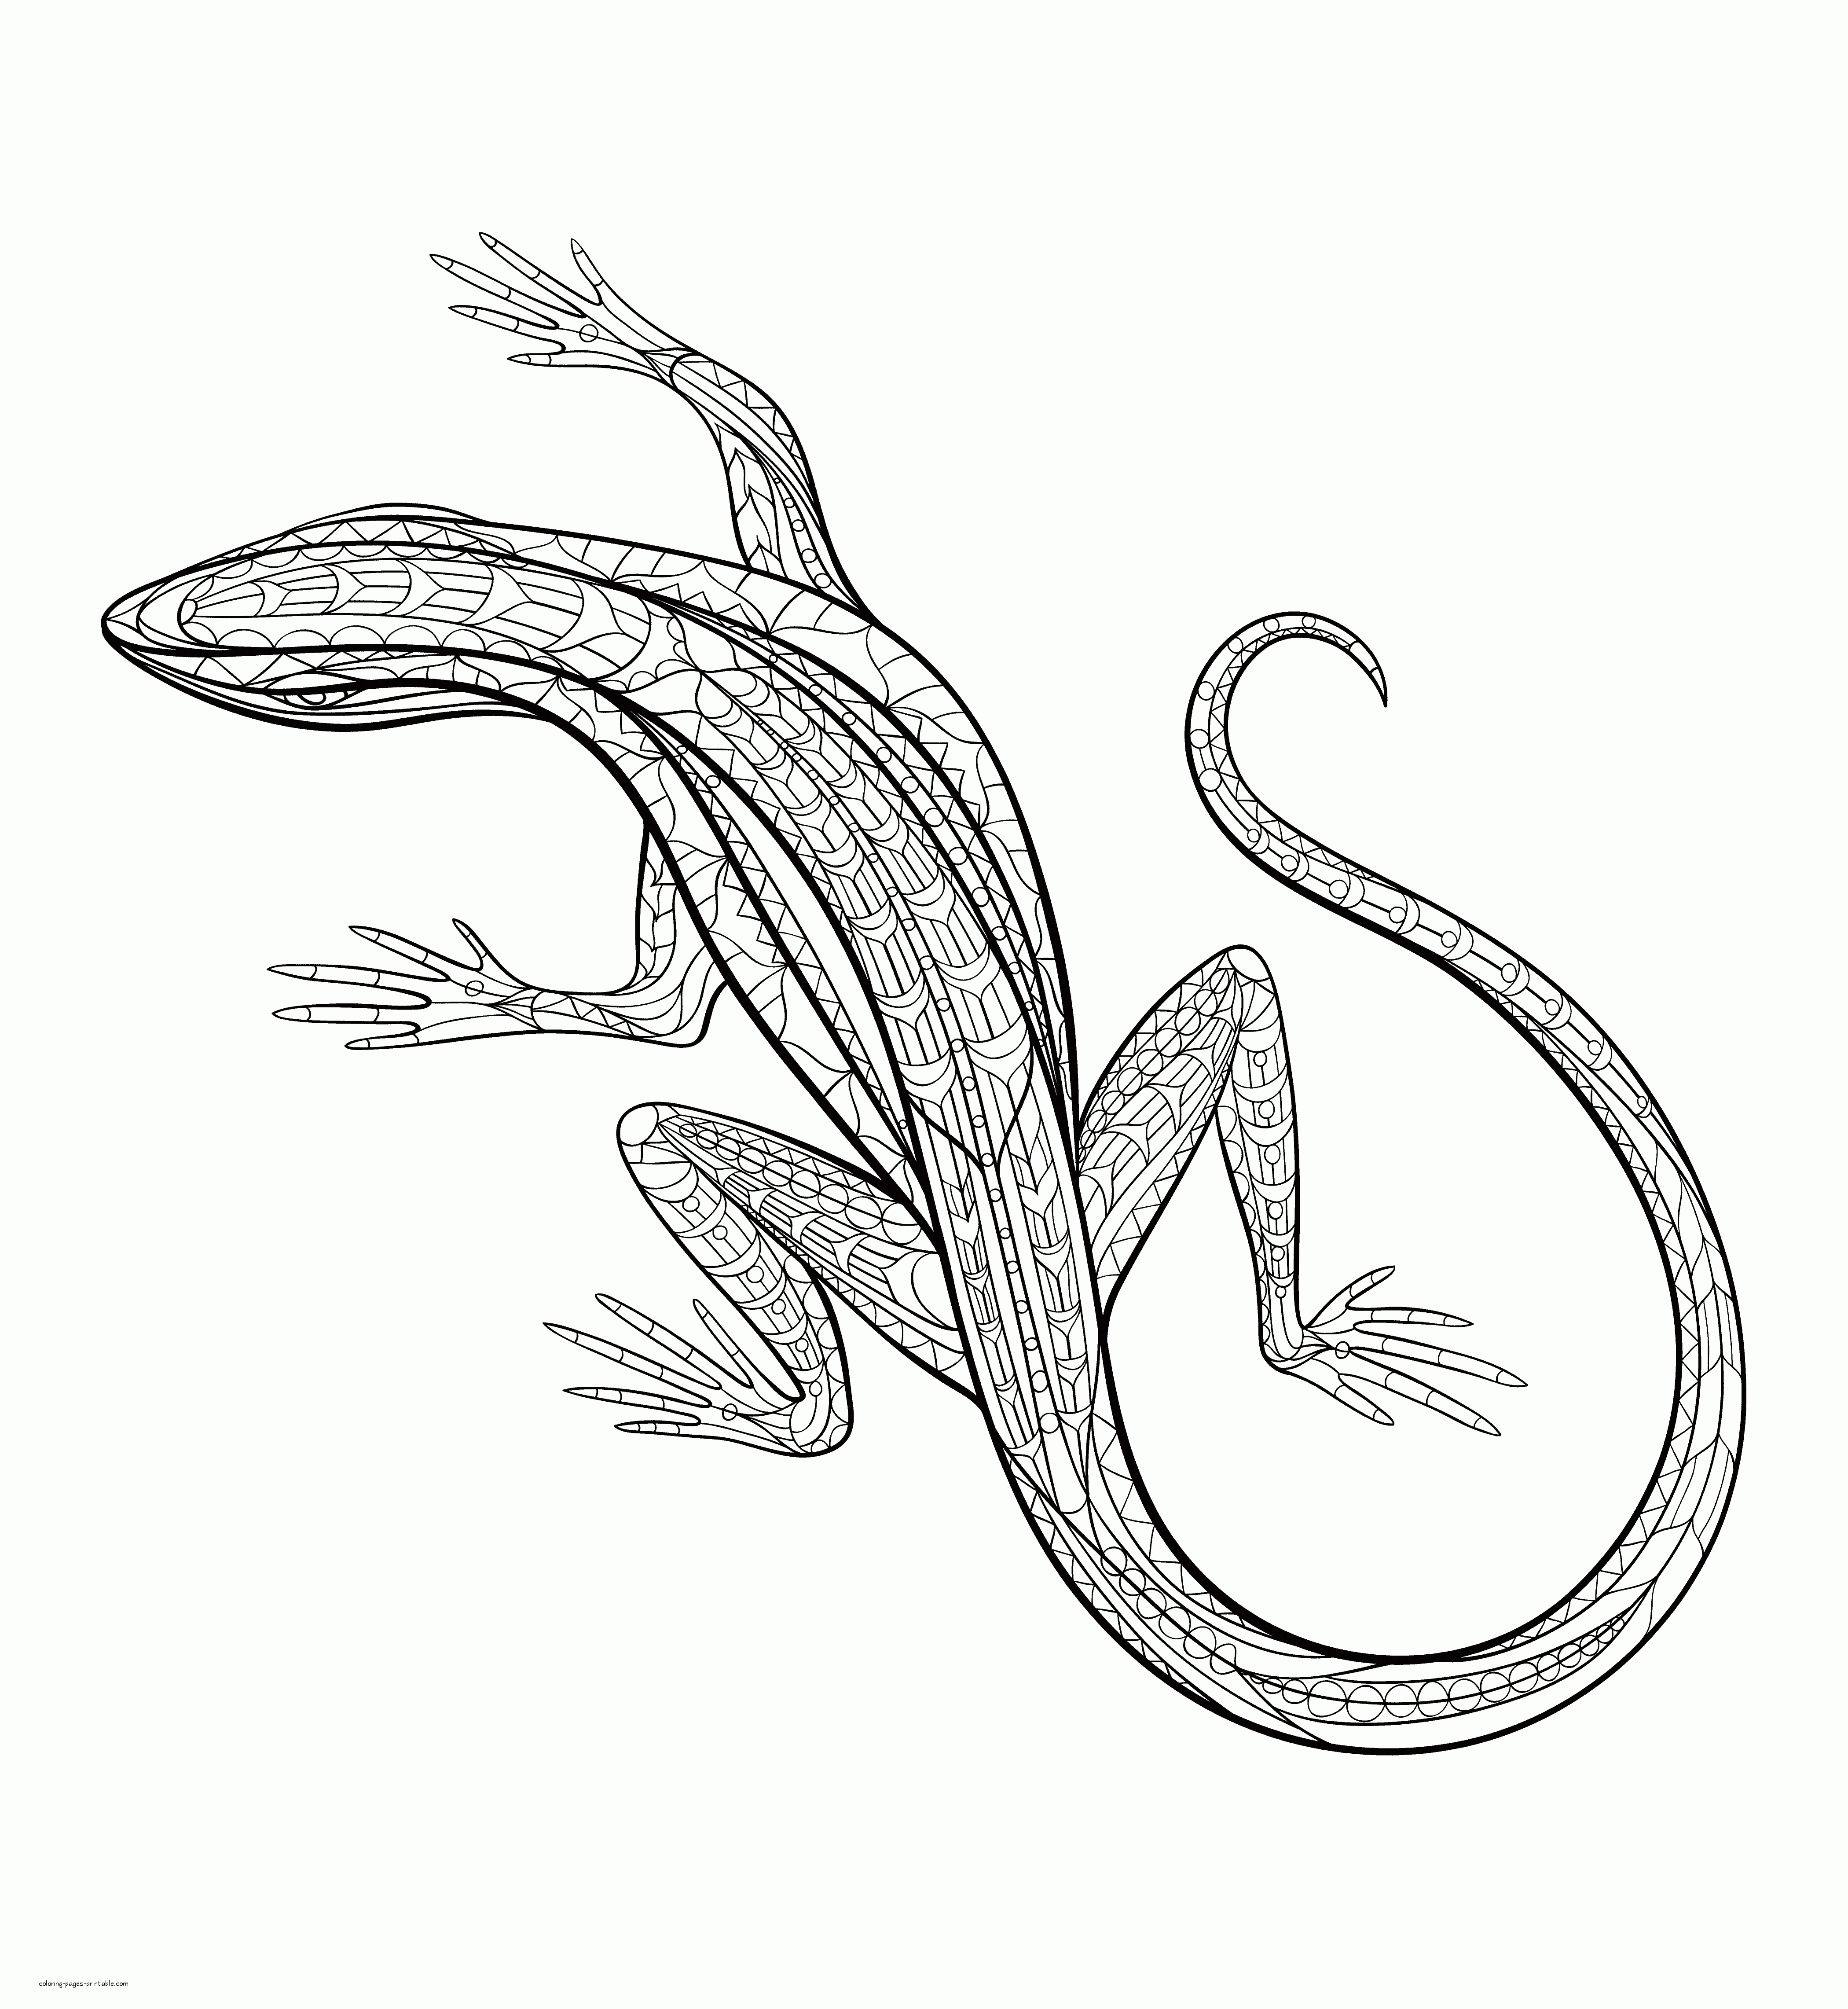 Lizard Coloring Pages For Adults || COLORING-PAGES-PRINTABLE.COM